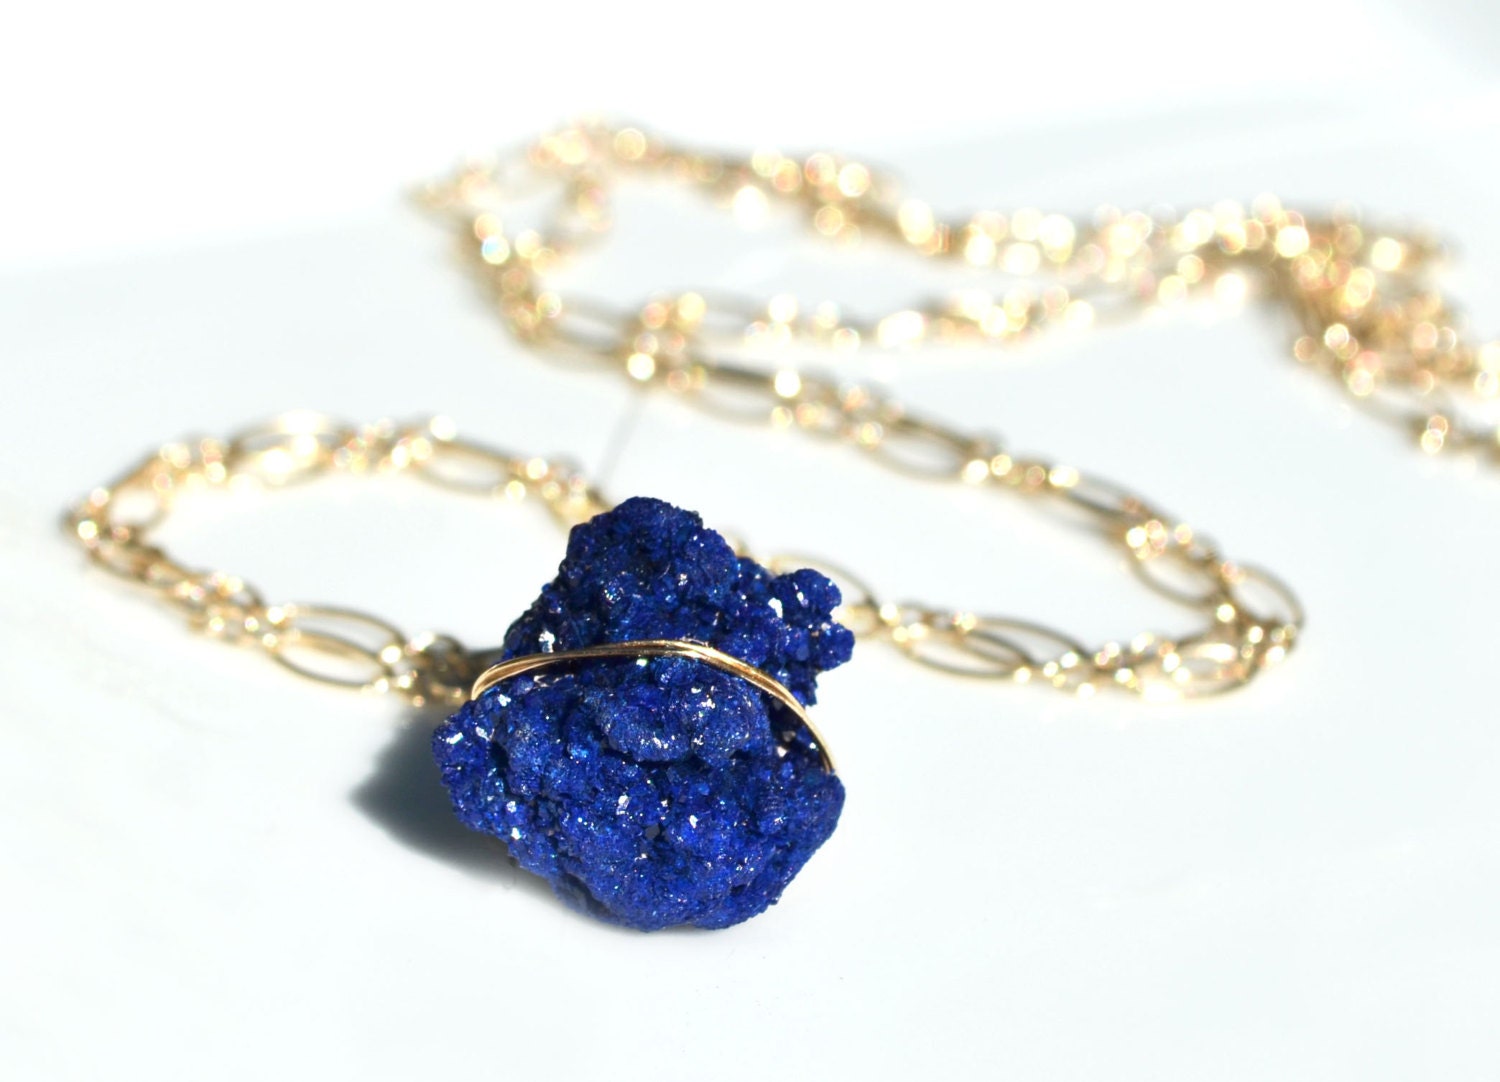 Moroccan Blue Azurite Crystal Cluster Necklace -- Raw Blue Druzy Stone -- In 14k Yellow Gold, Rose Gold, or Sterling Silver - PURYST